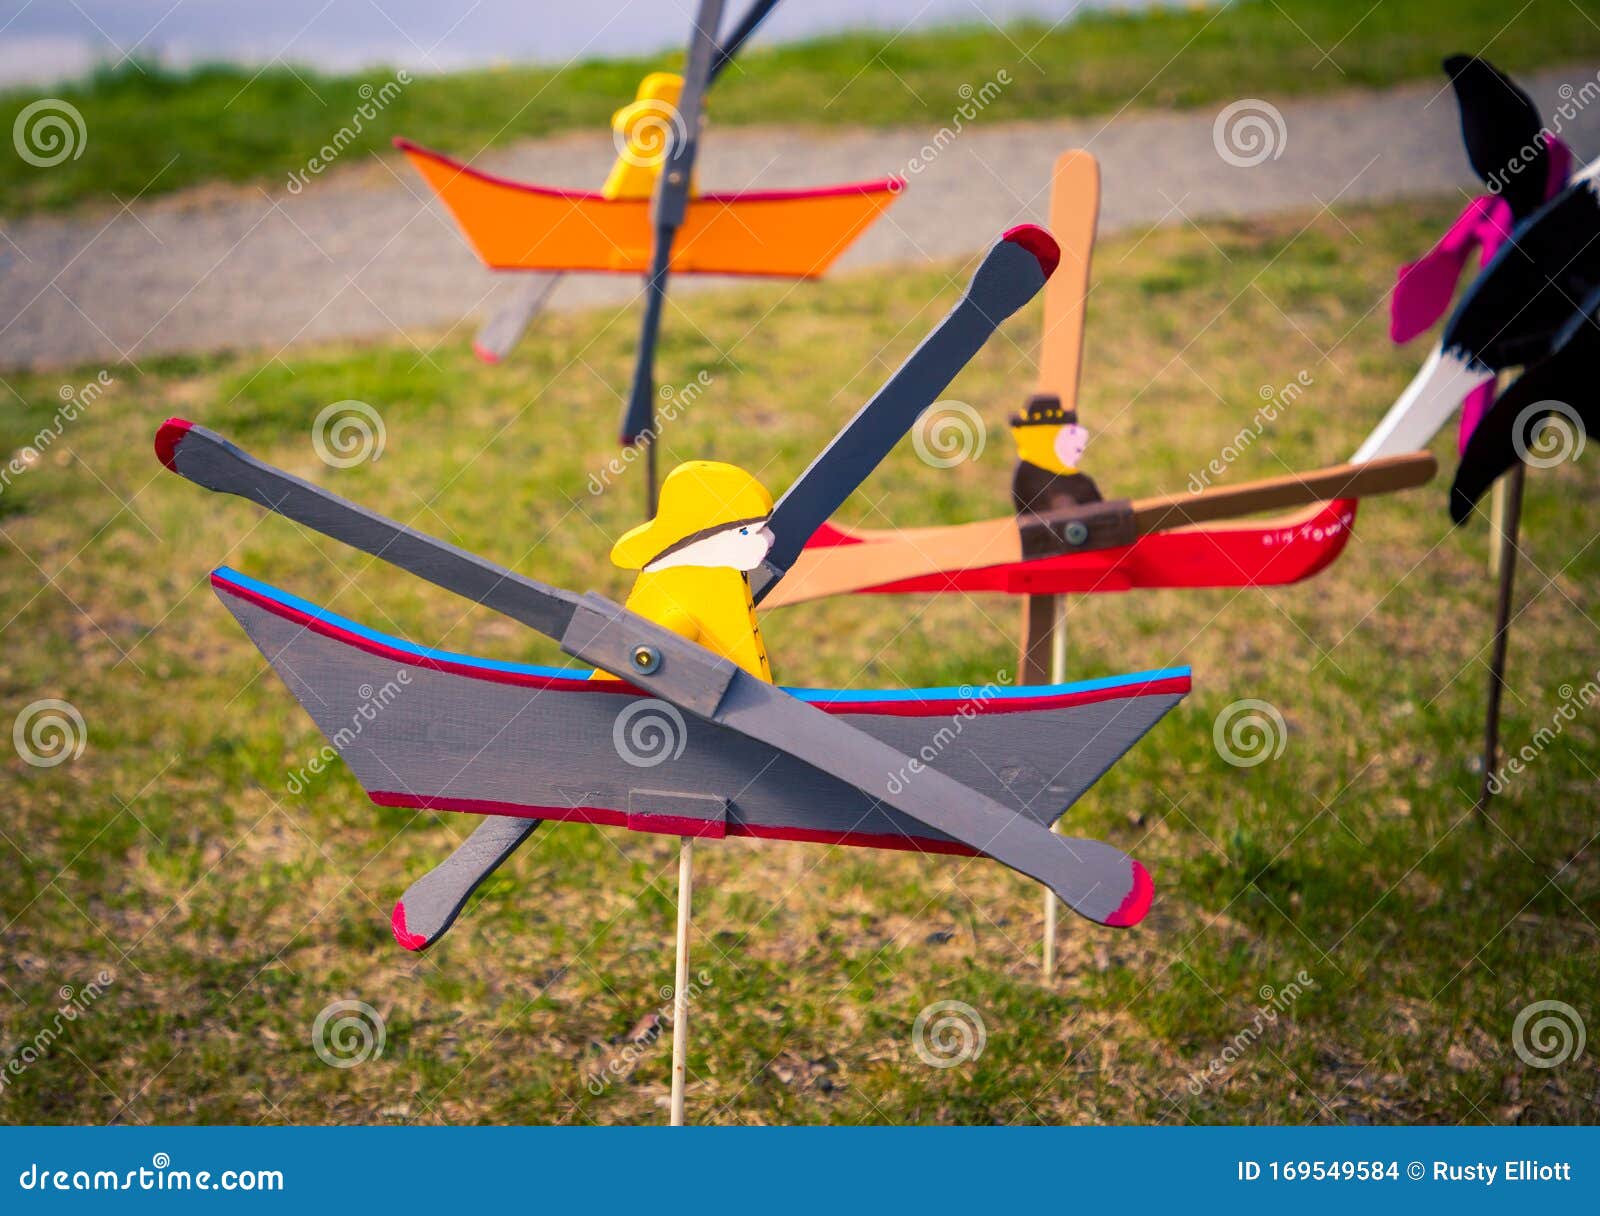 wooden whirligig fisherman and boat stock photo - image of